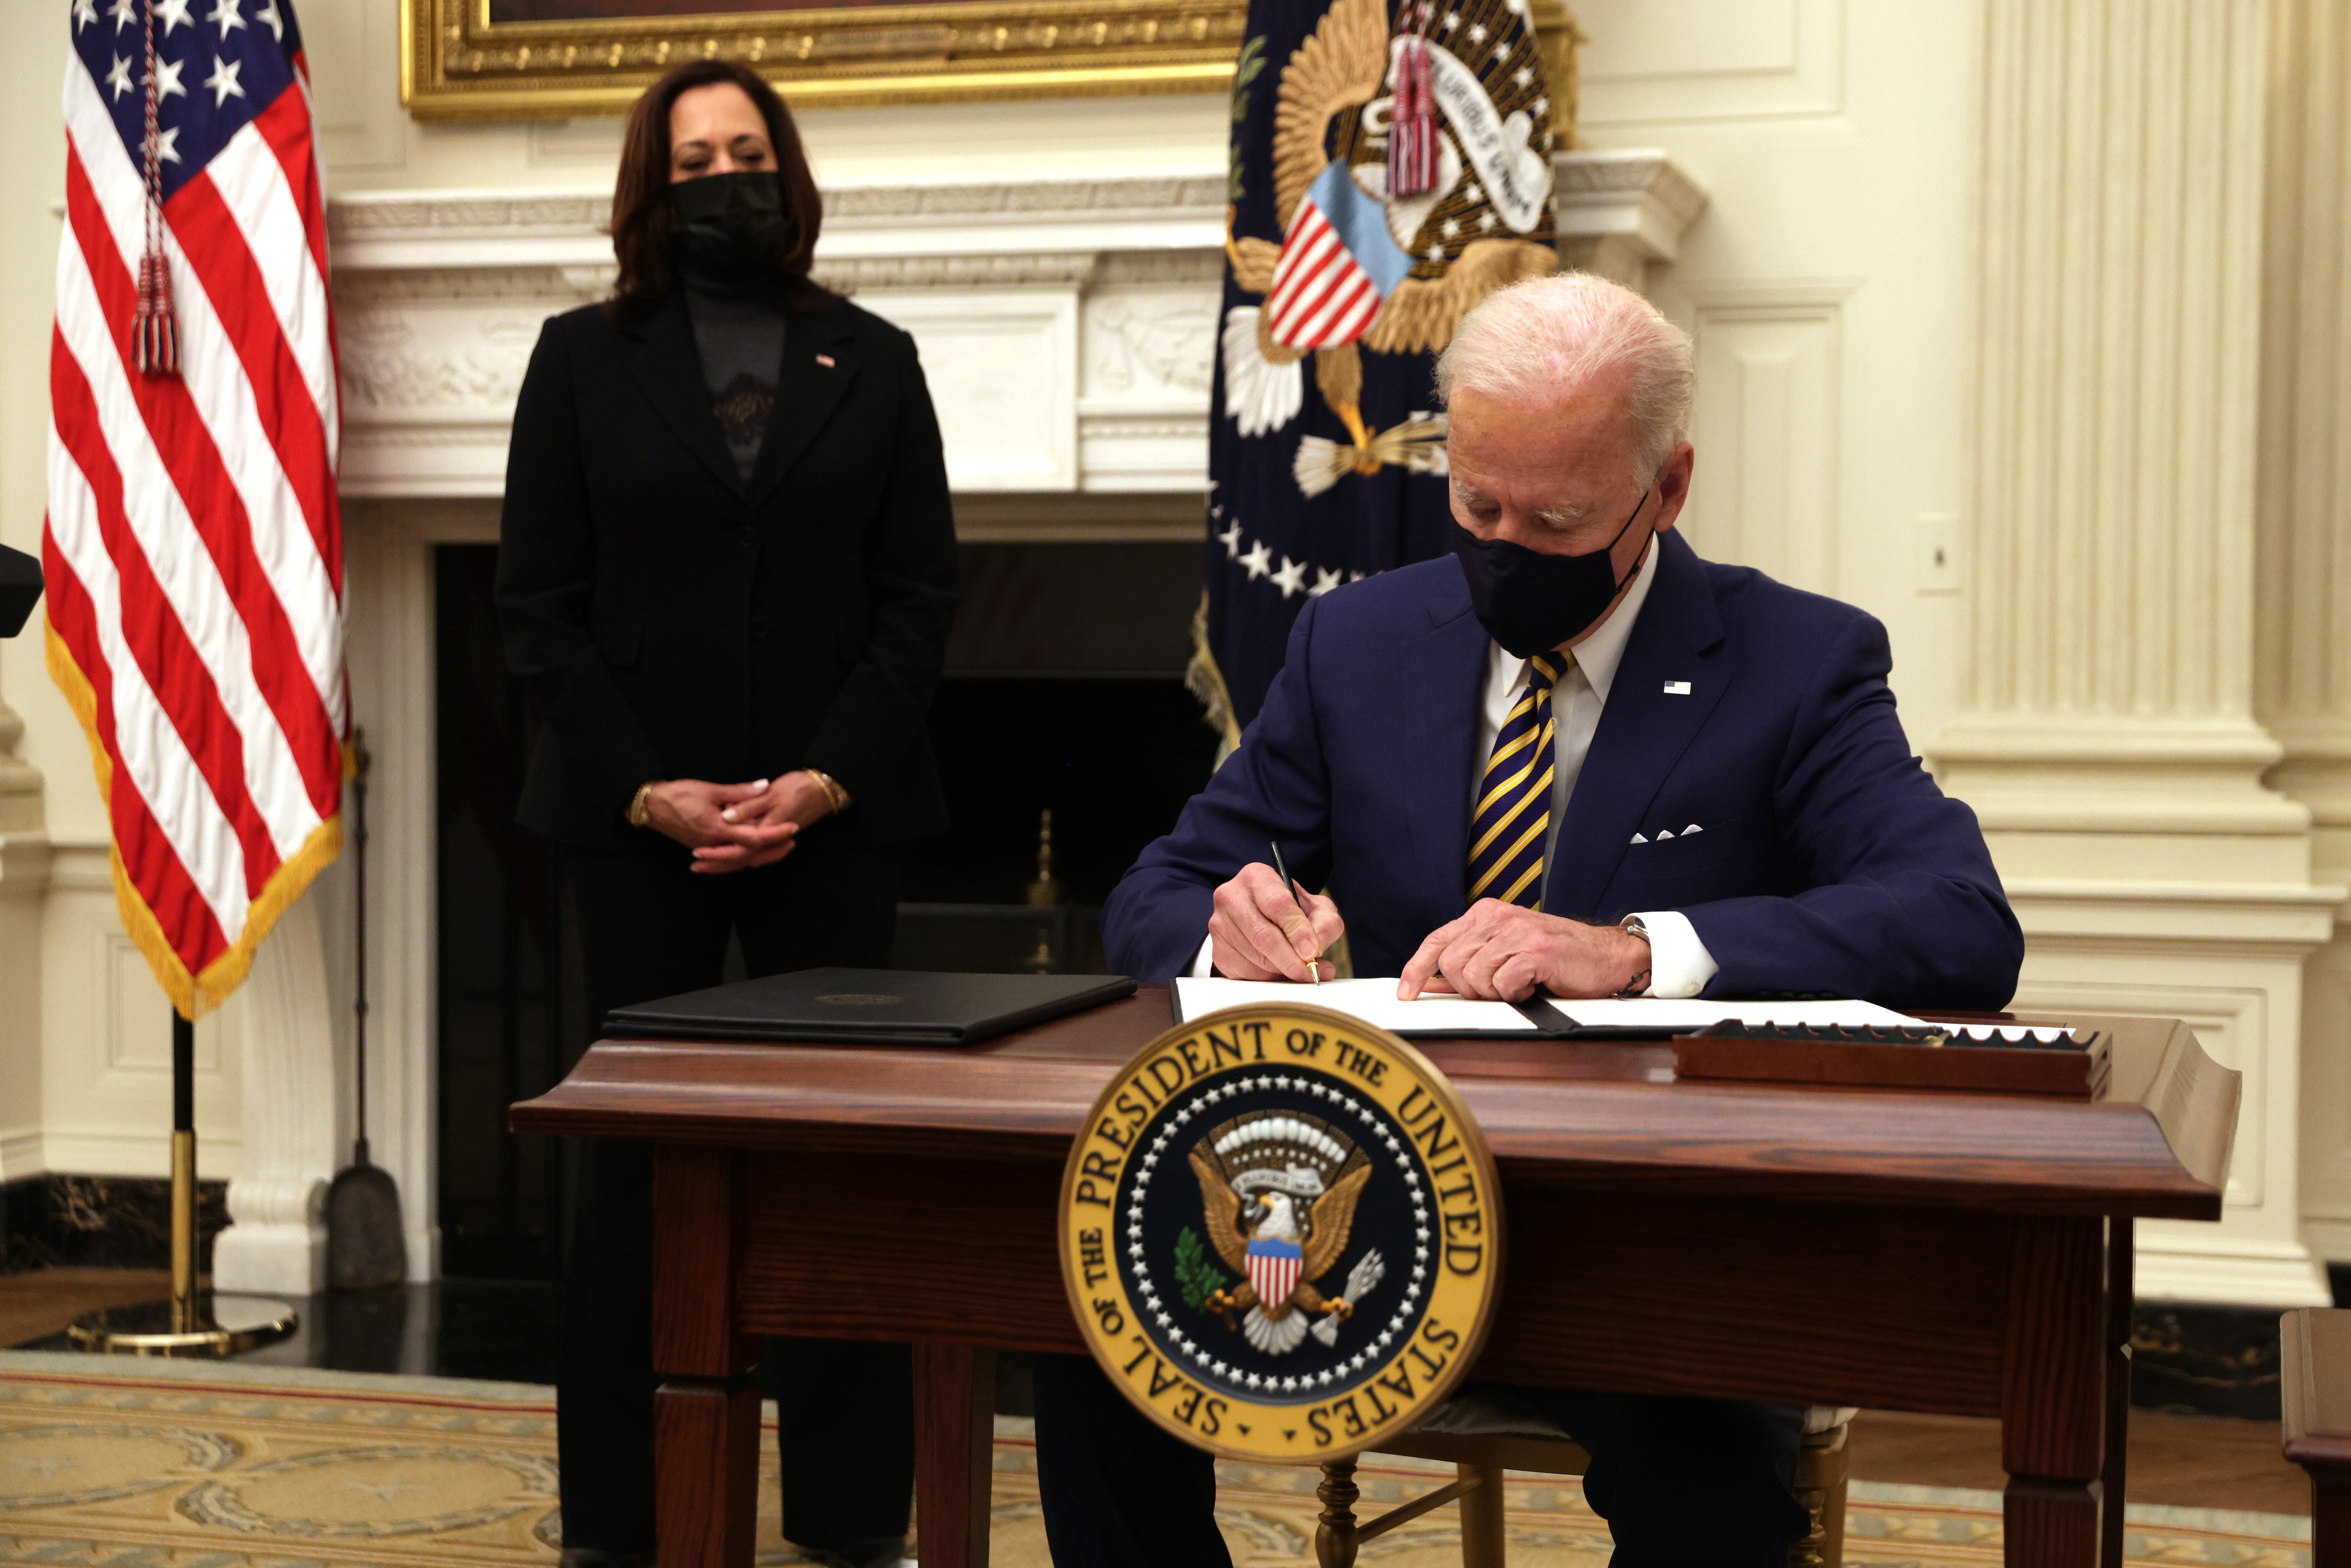 US President Joe Biden signs an executive order as Vice President Kamala Harris watches at the White House on January 22, 2021.